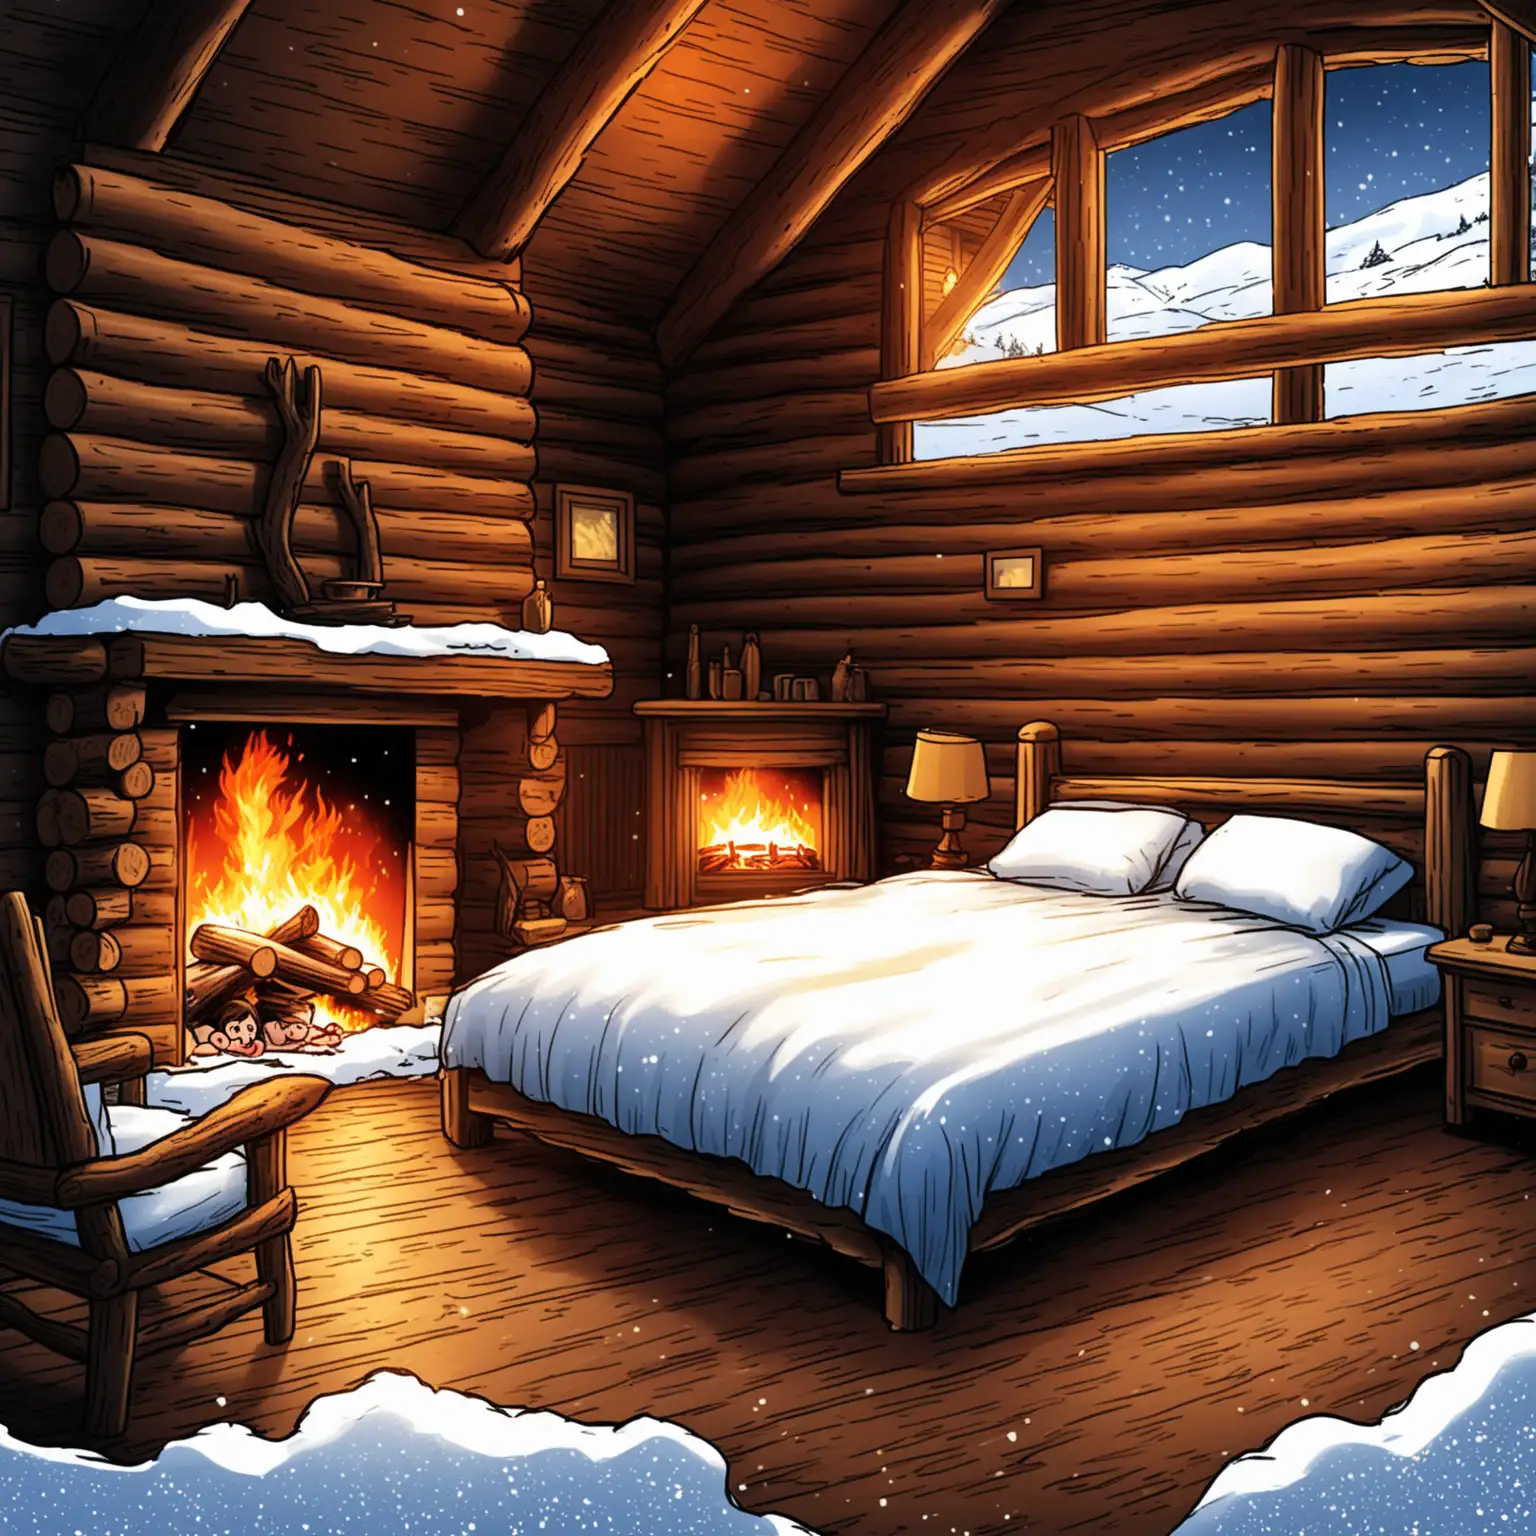 Cozy Log Cabin Interior with Fireplace and Bed in Snowy Setting